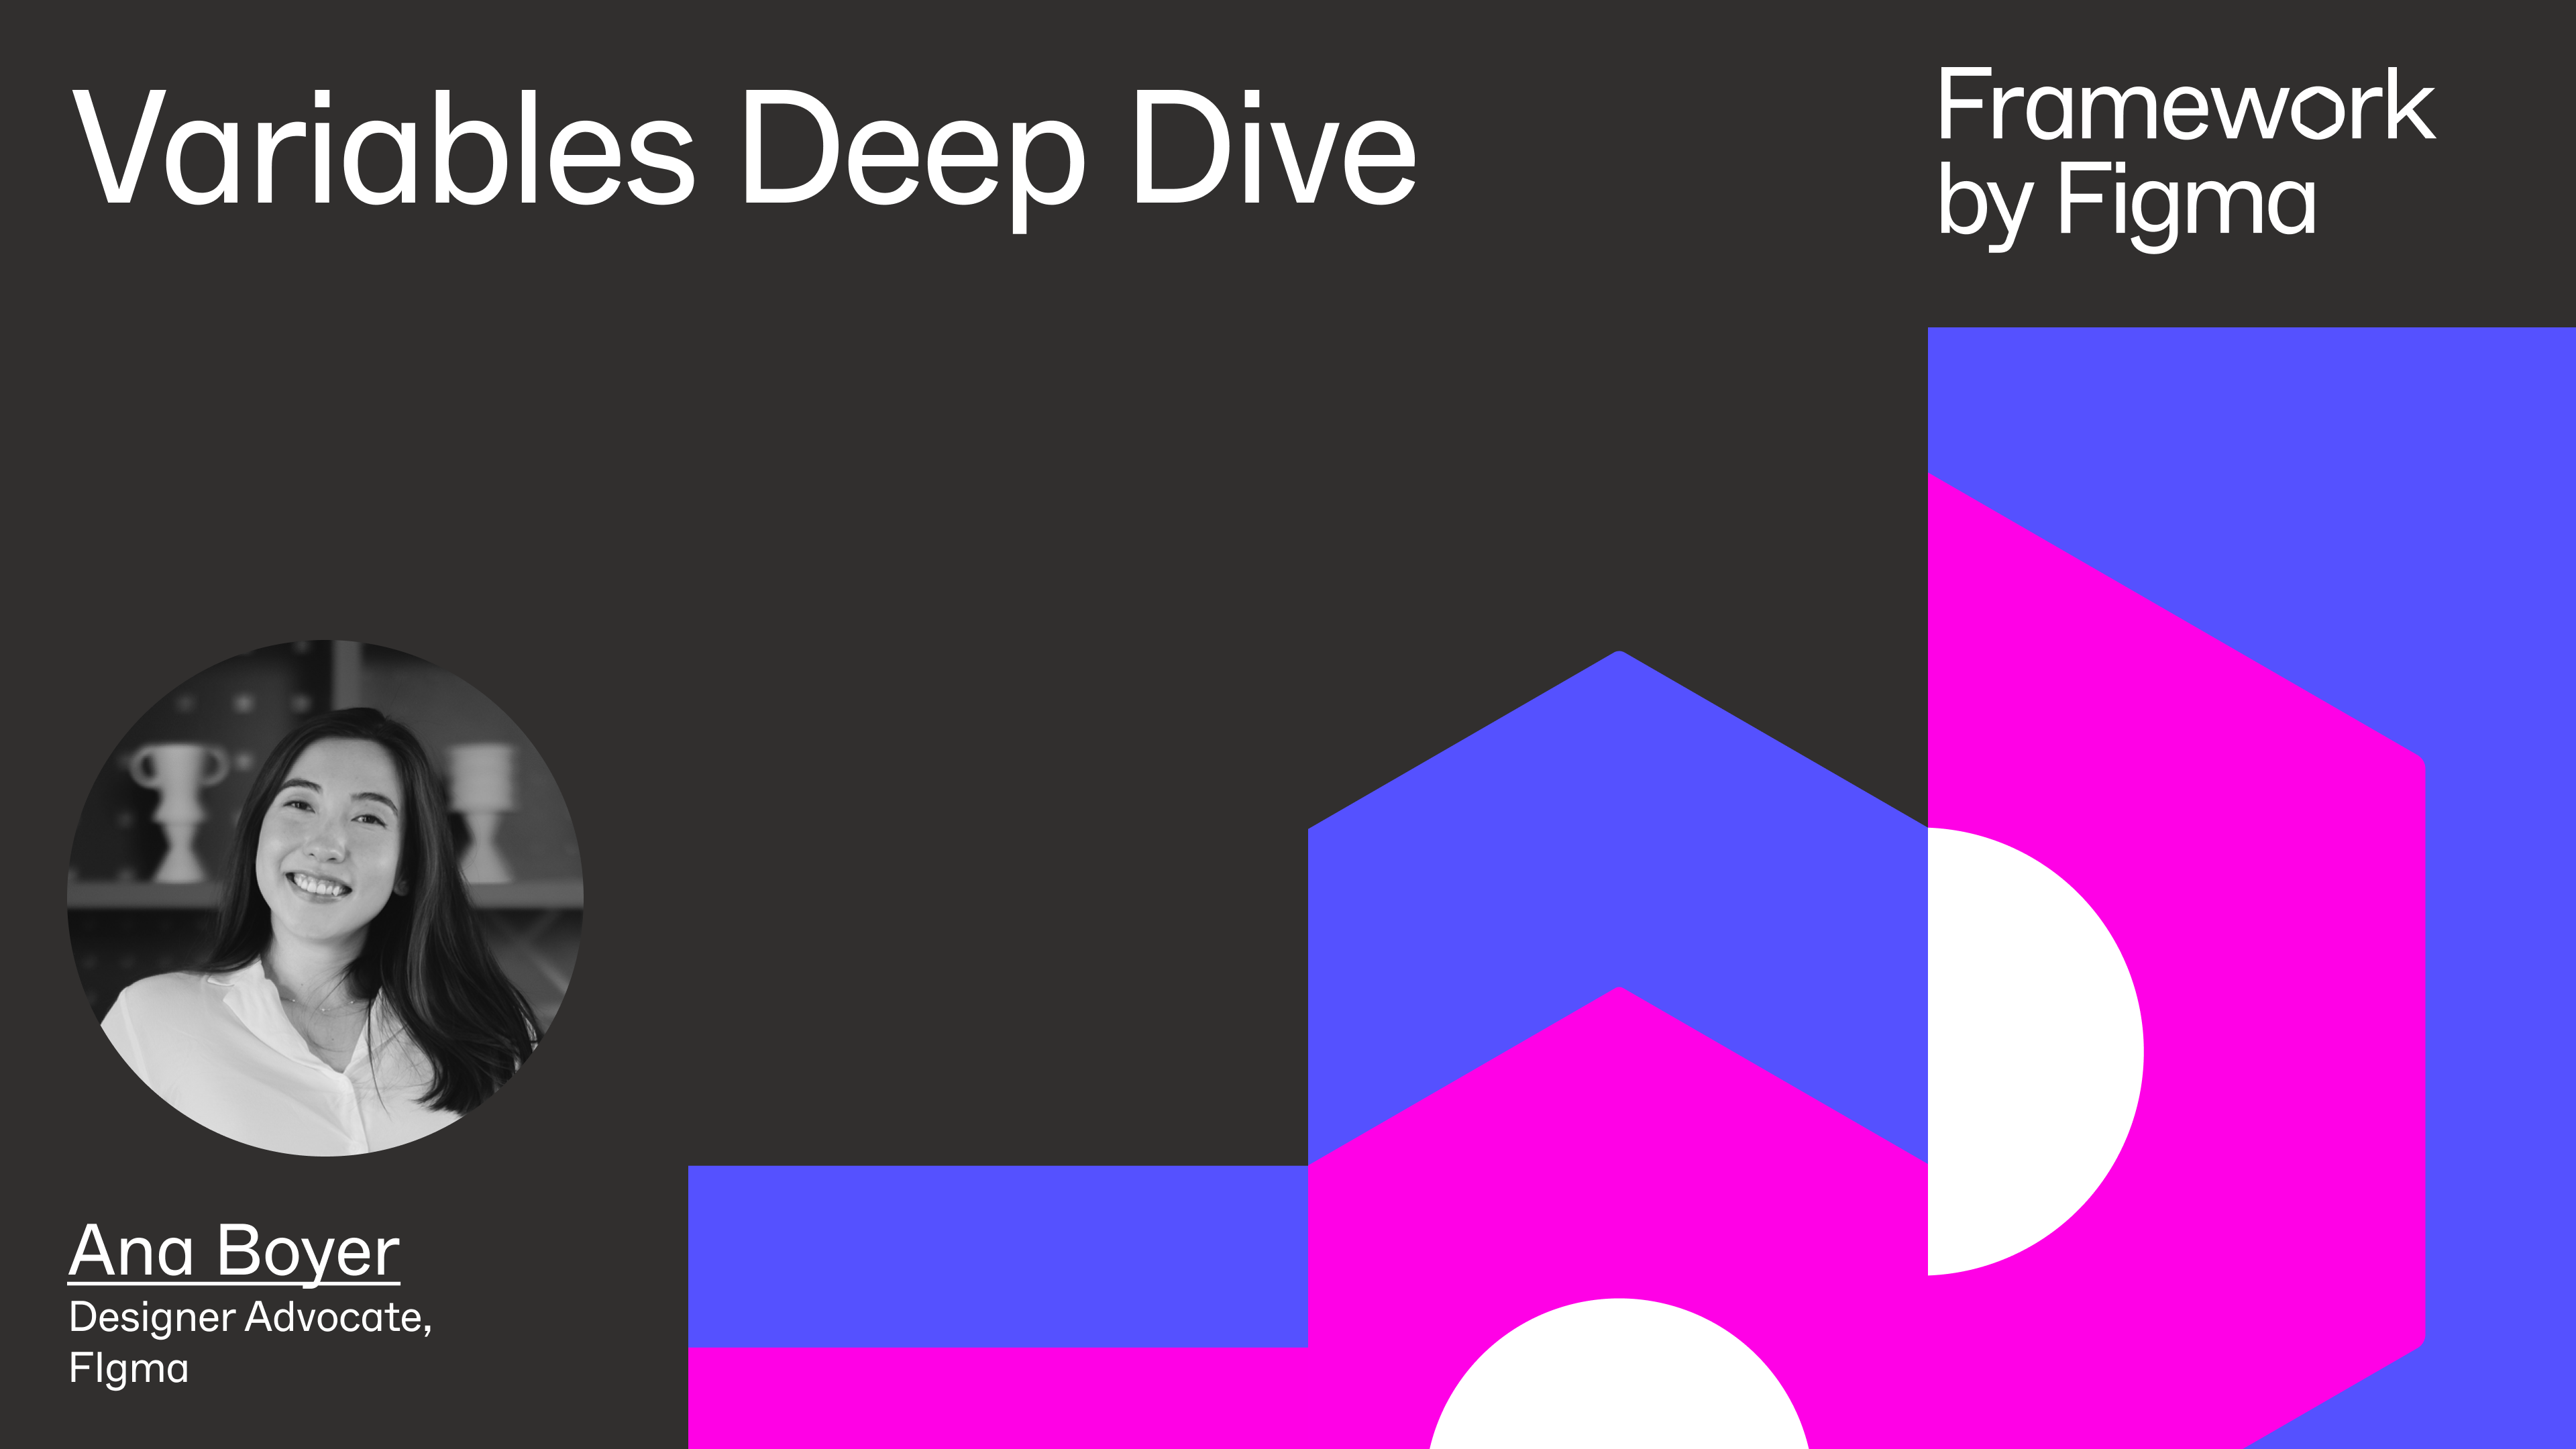 A title card with "Variables Deep Dive" text, showcasing a portrait and name of Ana Boyer, Designer Advocate at Figma.